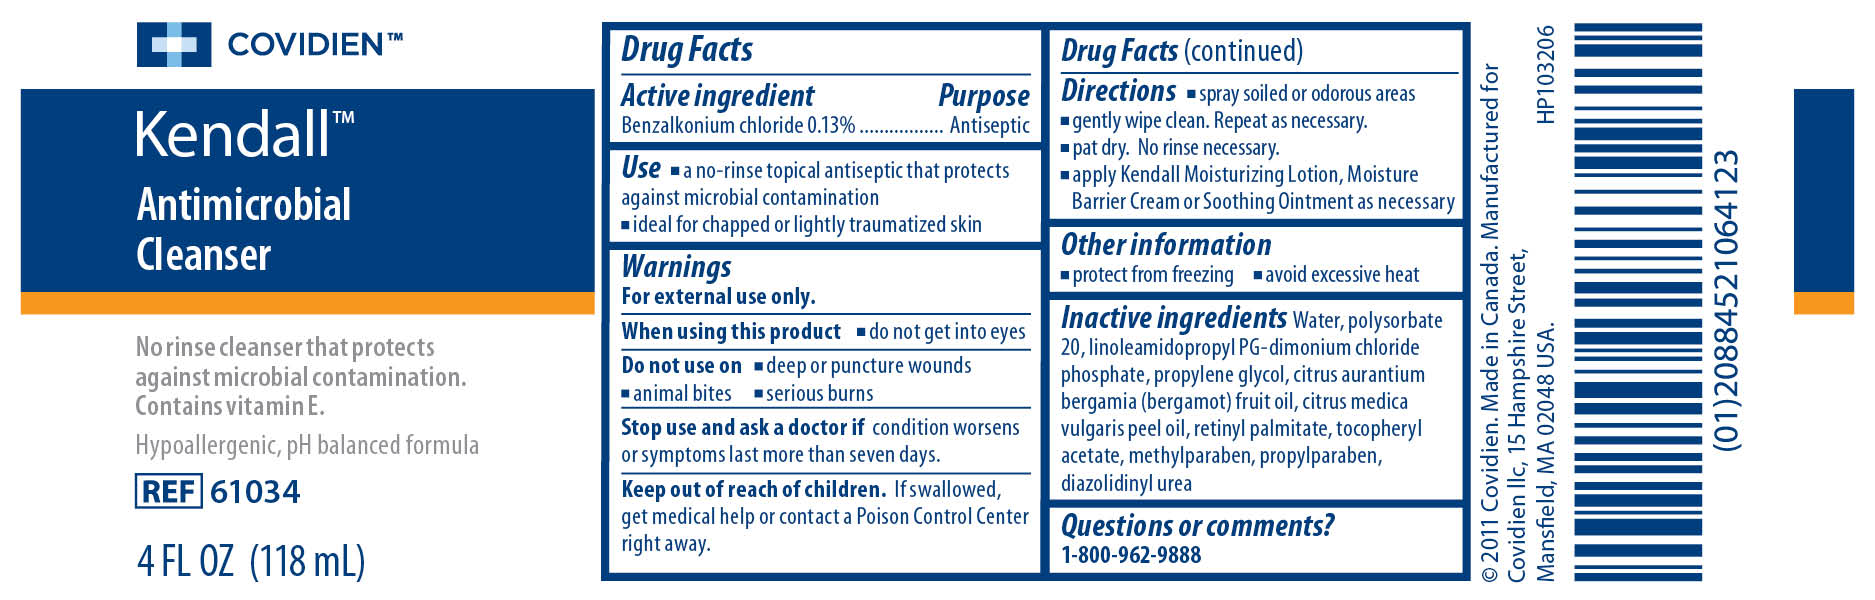 Image of Kendall Antimicrobial Cleanser Label